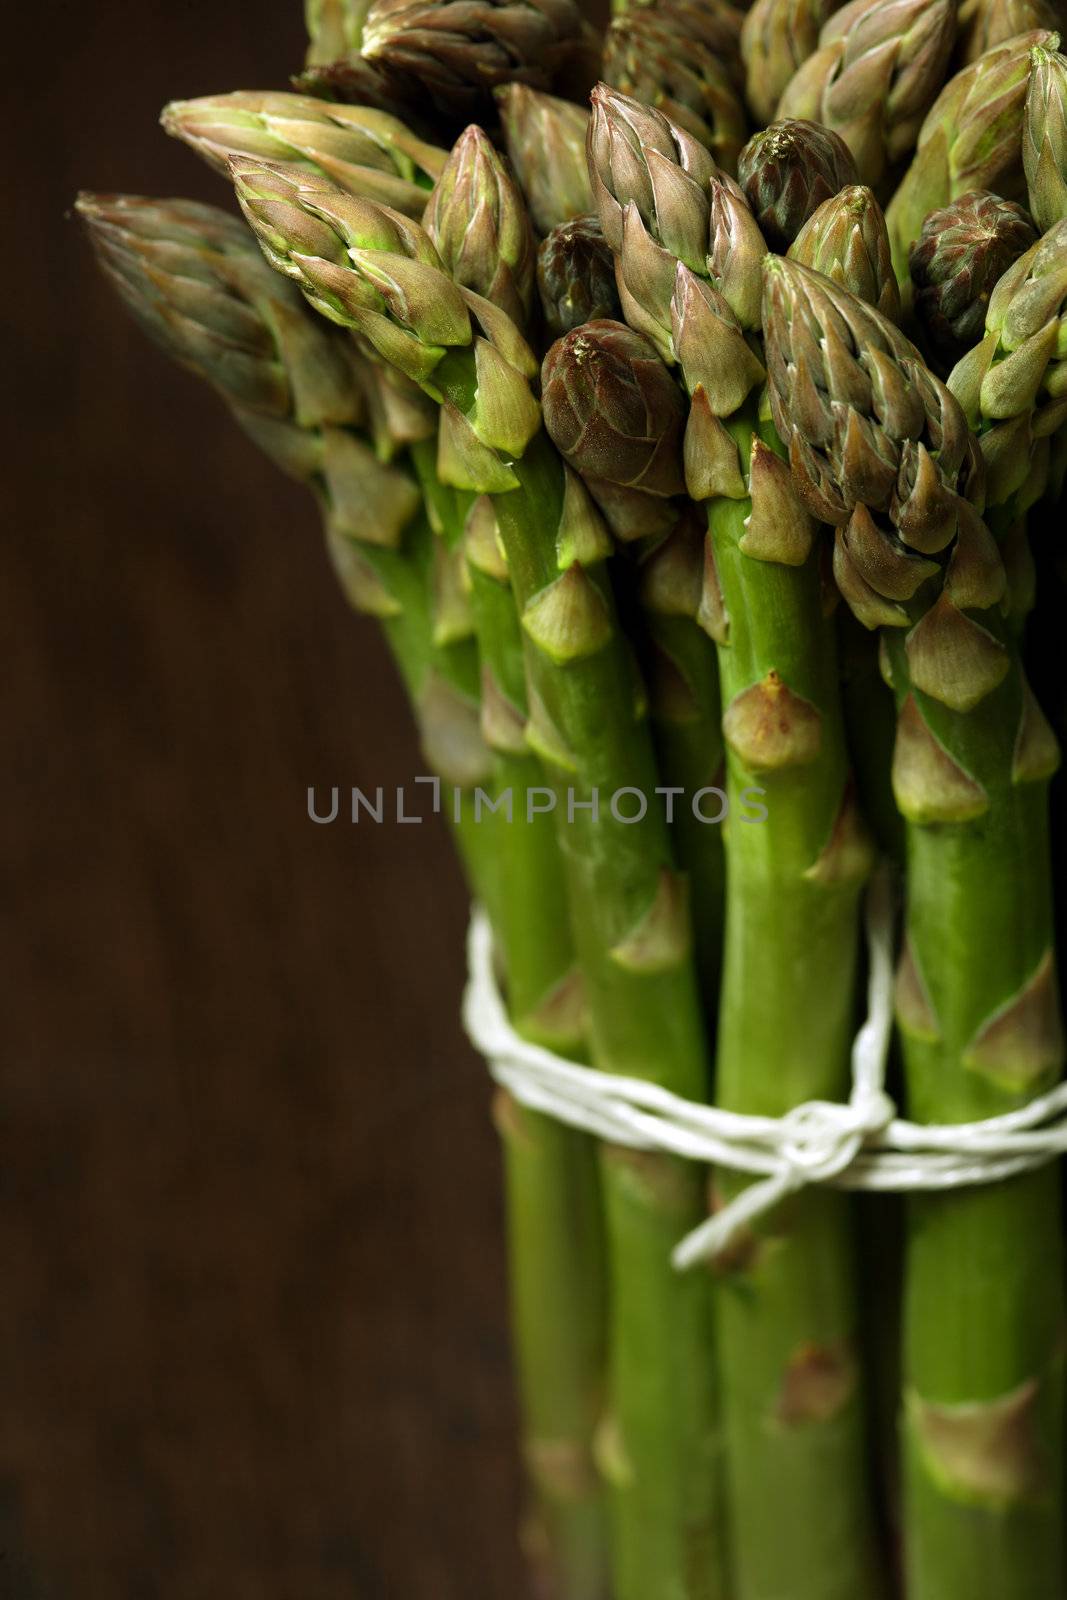 Bunch of asparagus on a wooden table.  Shallow depth of field, focusing on the tips.
